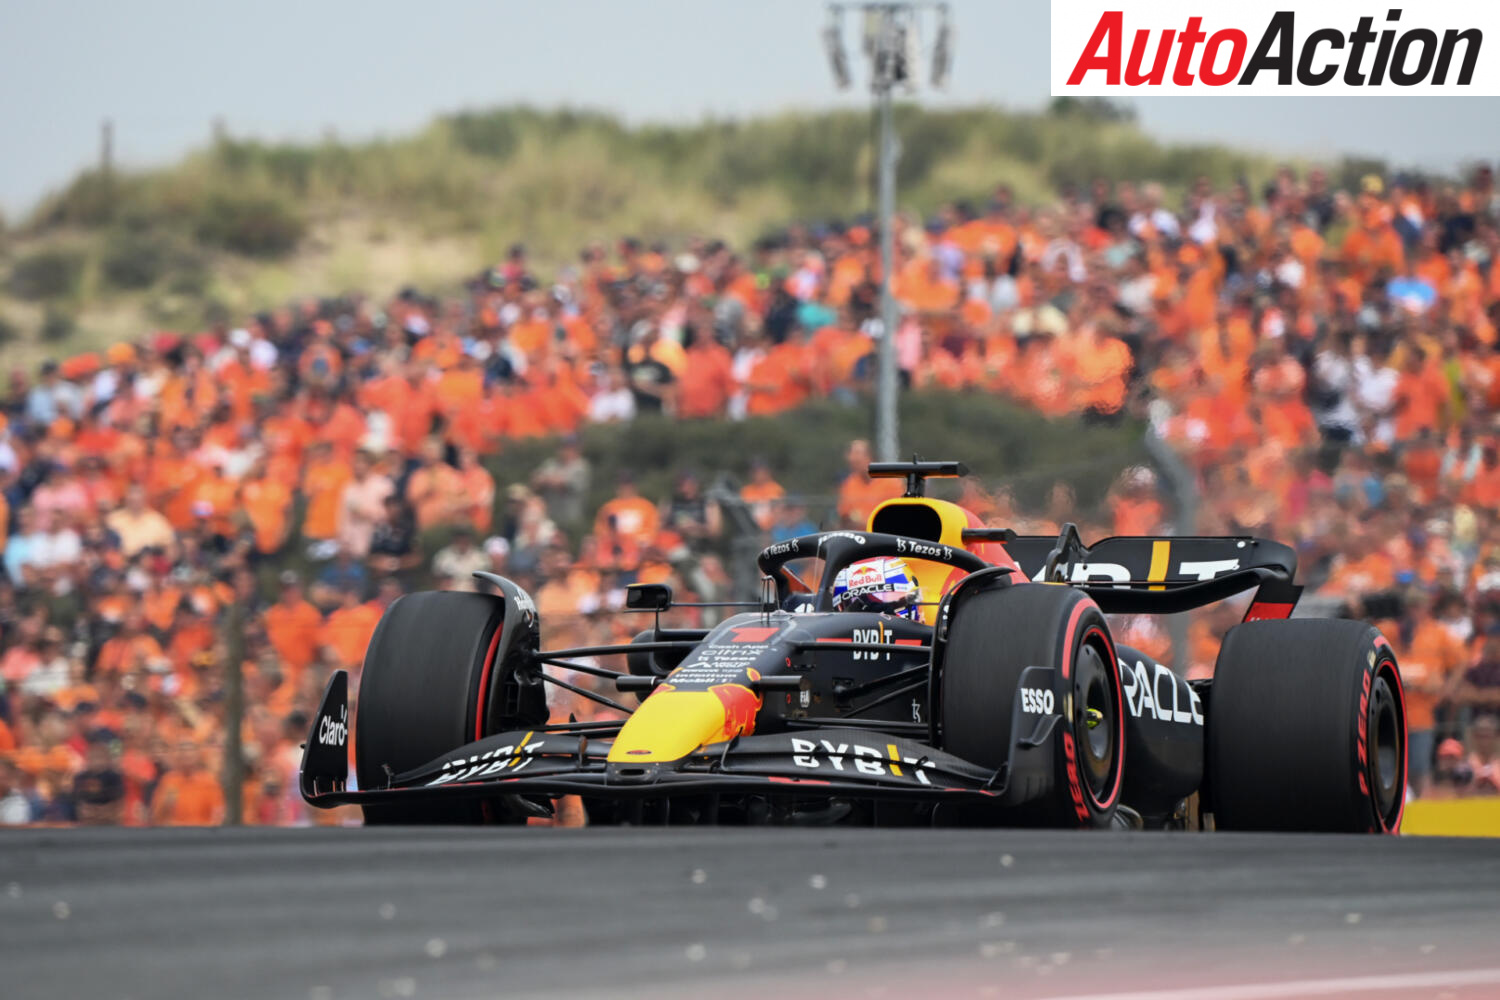 VERSTAPPEN TAKES FOUR STRAIGHT AT HOME GP - Auto Action